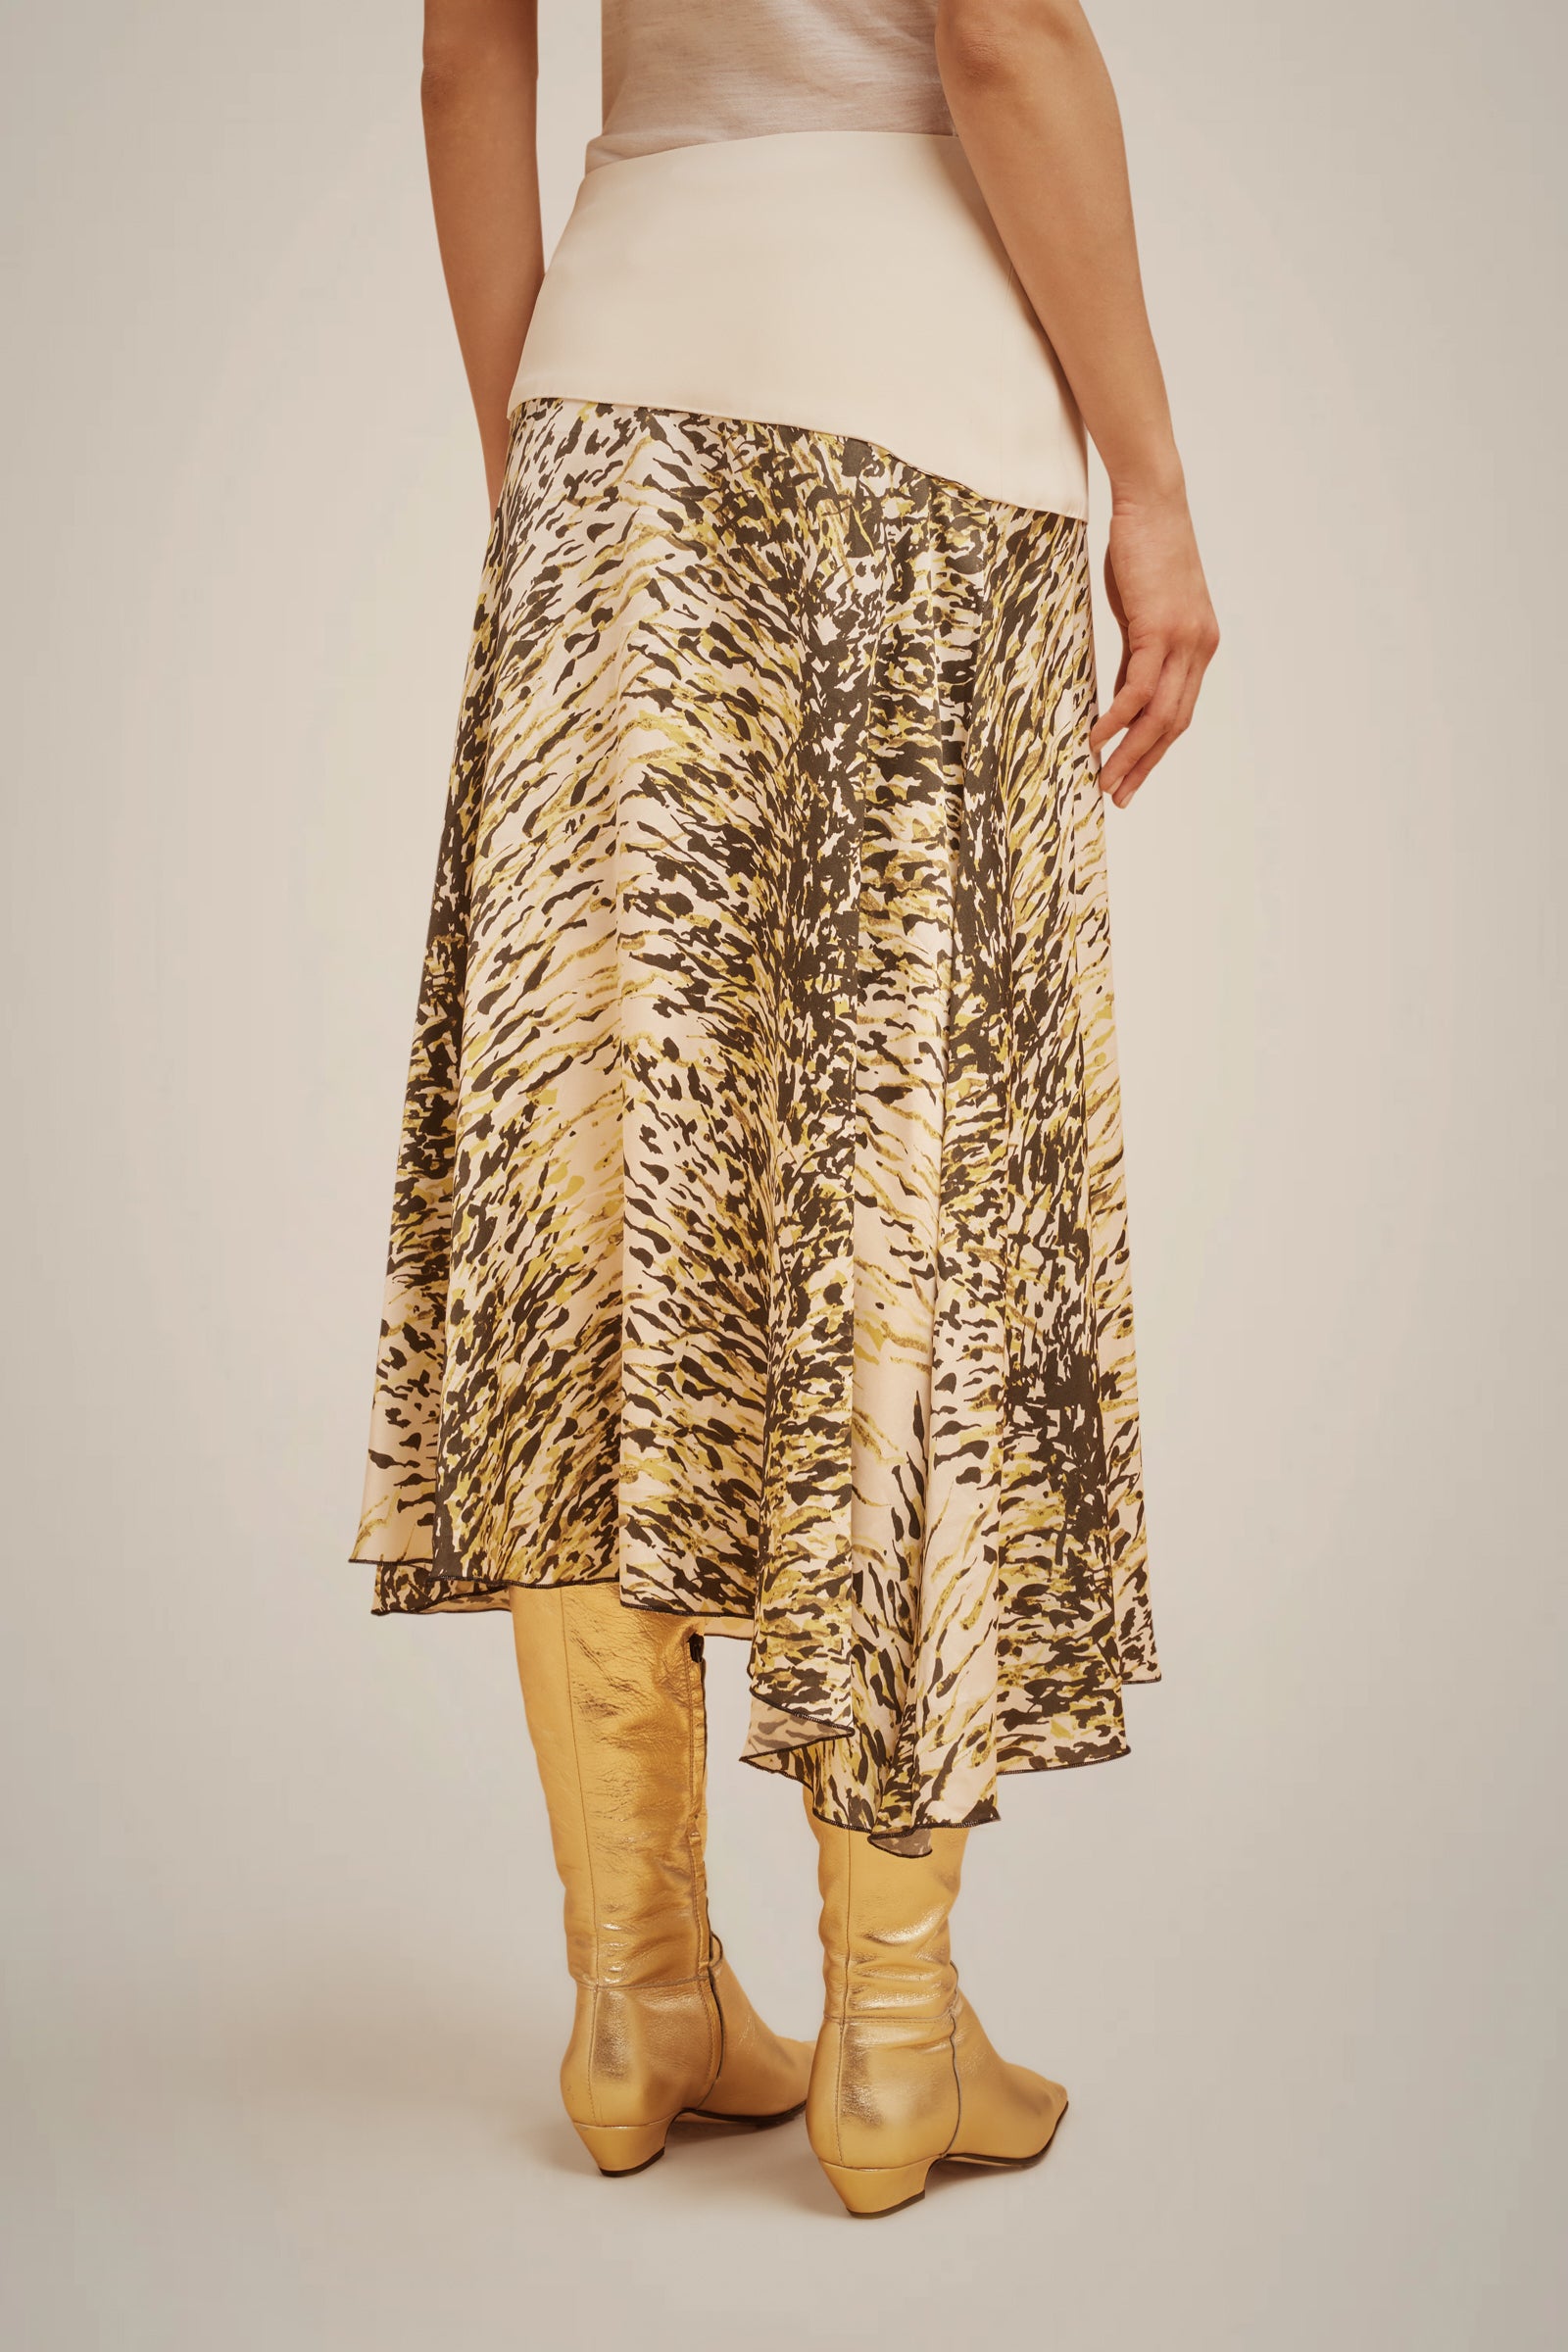 PRINTED SKIRT WITH BASQUE